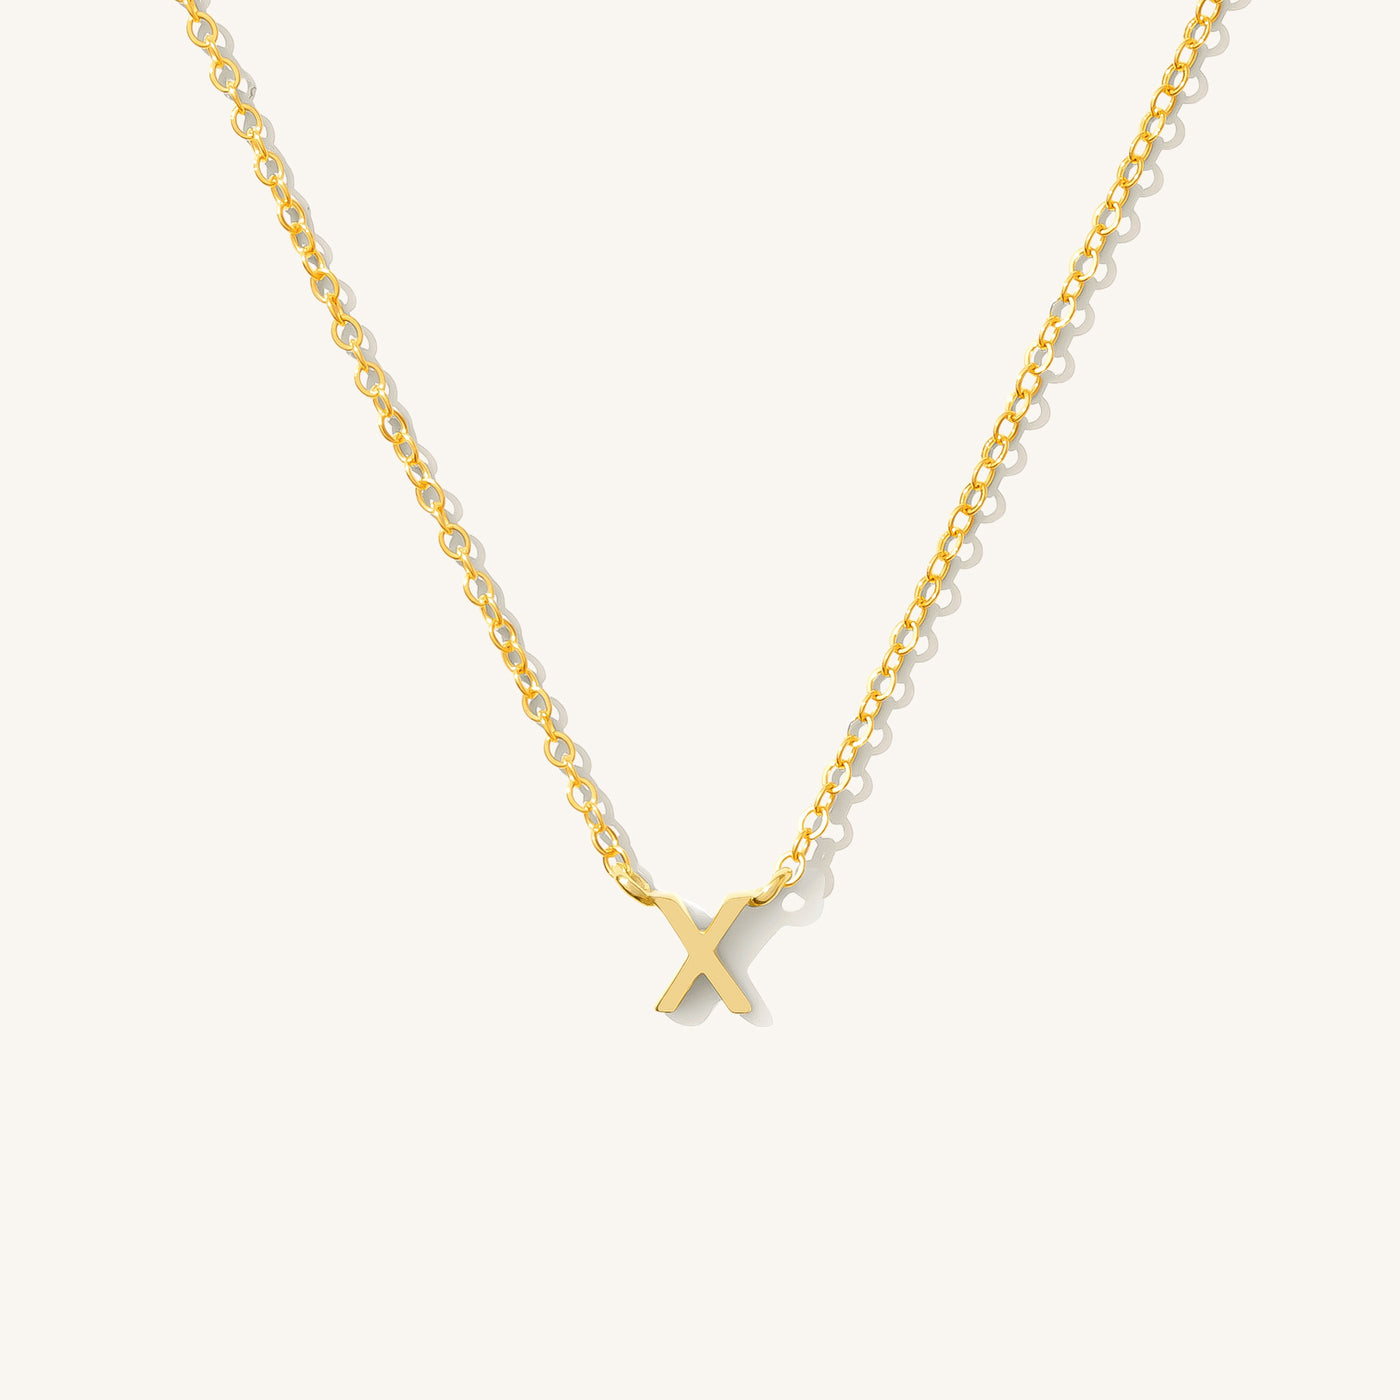 Buy Pave Initial Necklace, CZ Initial Necklace, Dainty Necklace, Tiny  Initial Necklace, Gold Initial Necklace, Diamond Necklace, Sterling Silver  Online in India - Etsy